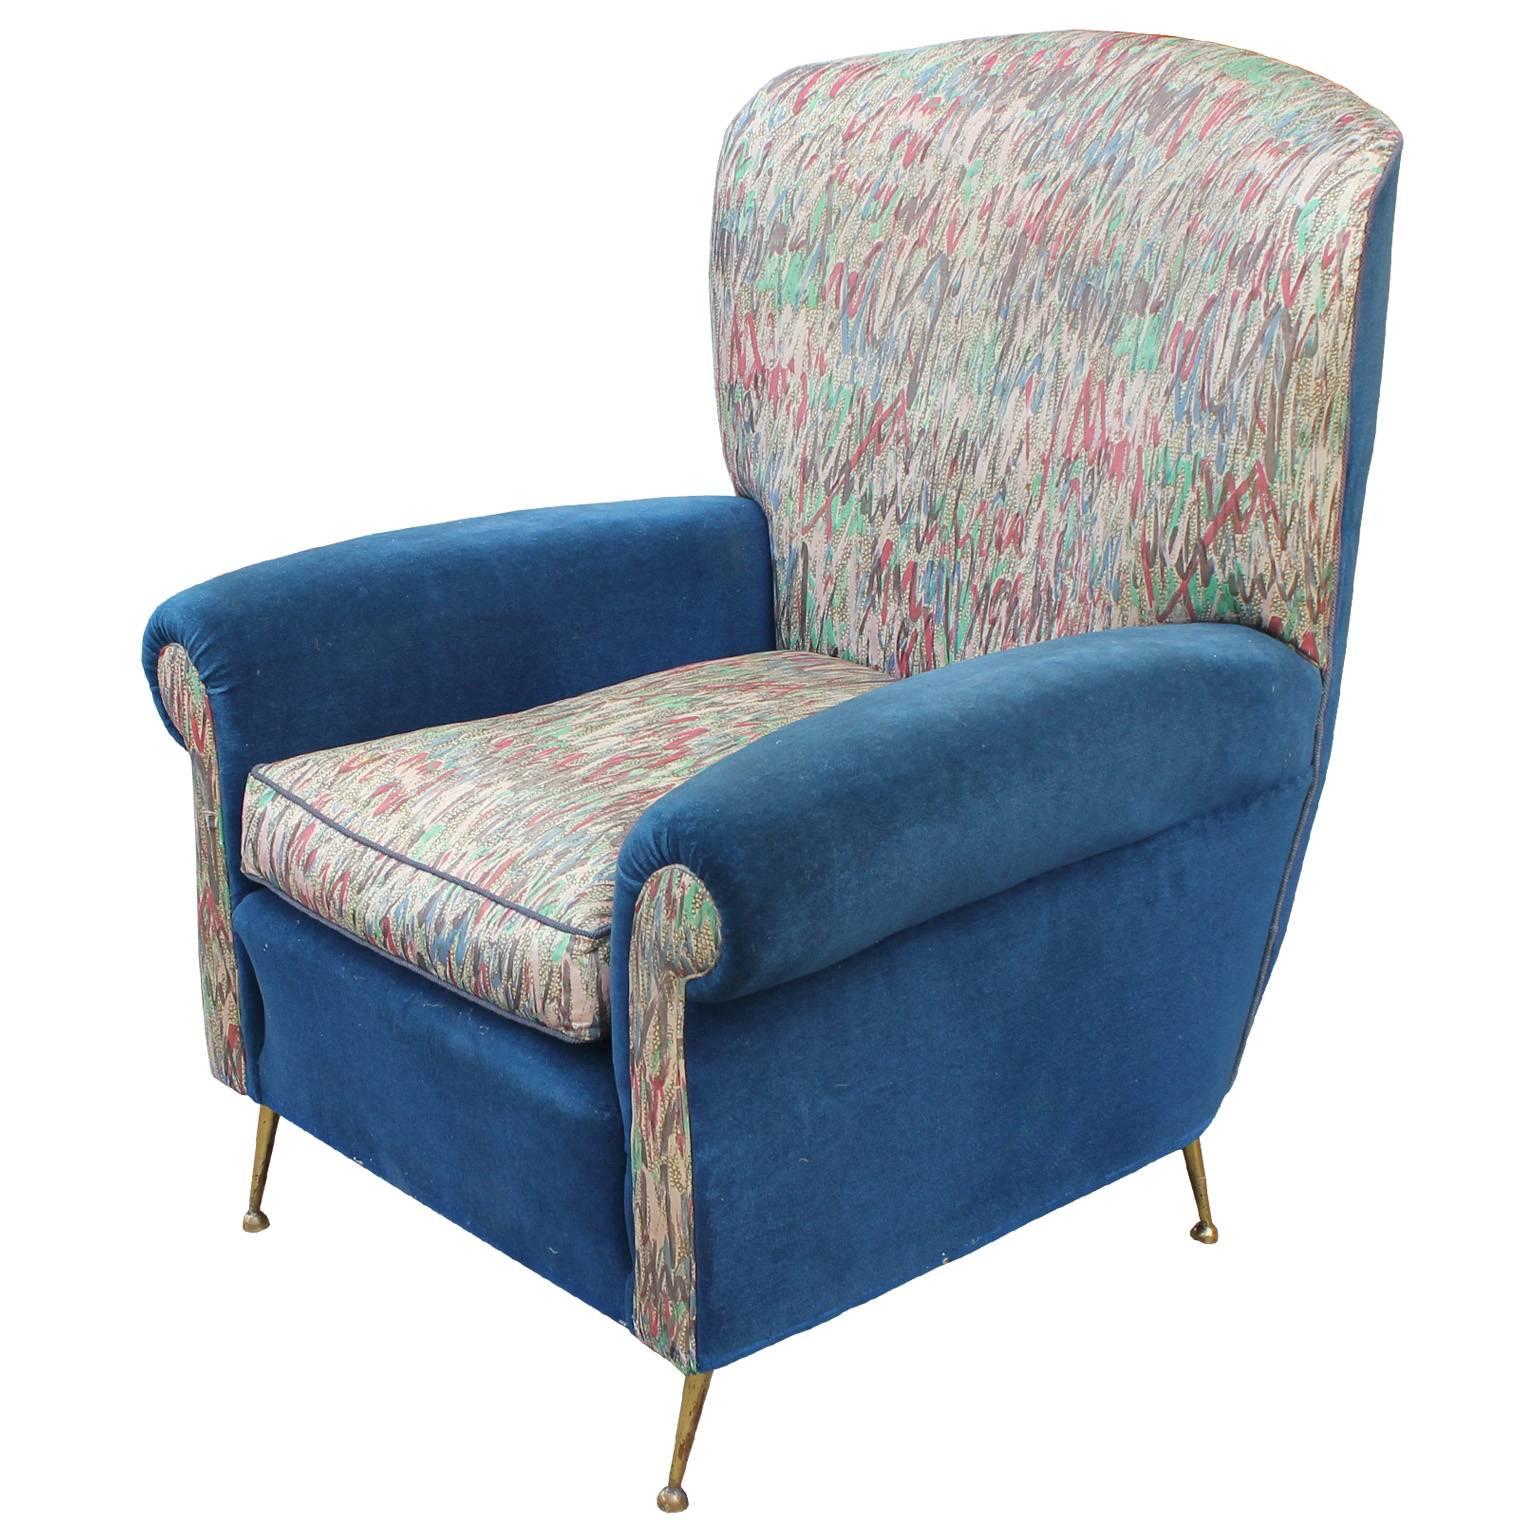 Hollywood Regency Pair of Brass Legged Italian Modern Lounge Chairs with Blue Velvet and Floral